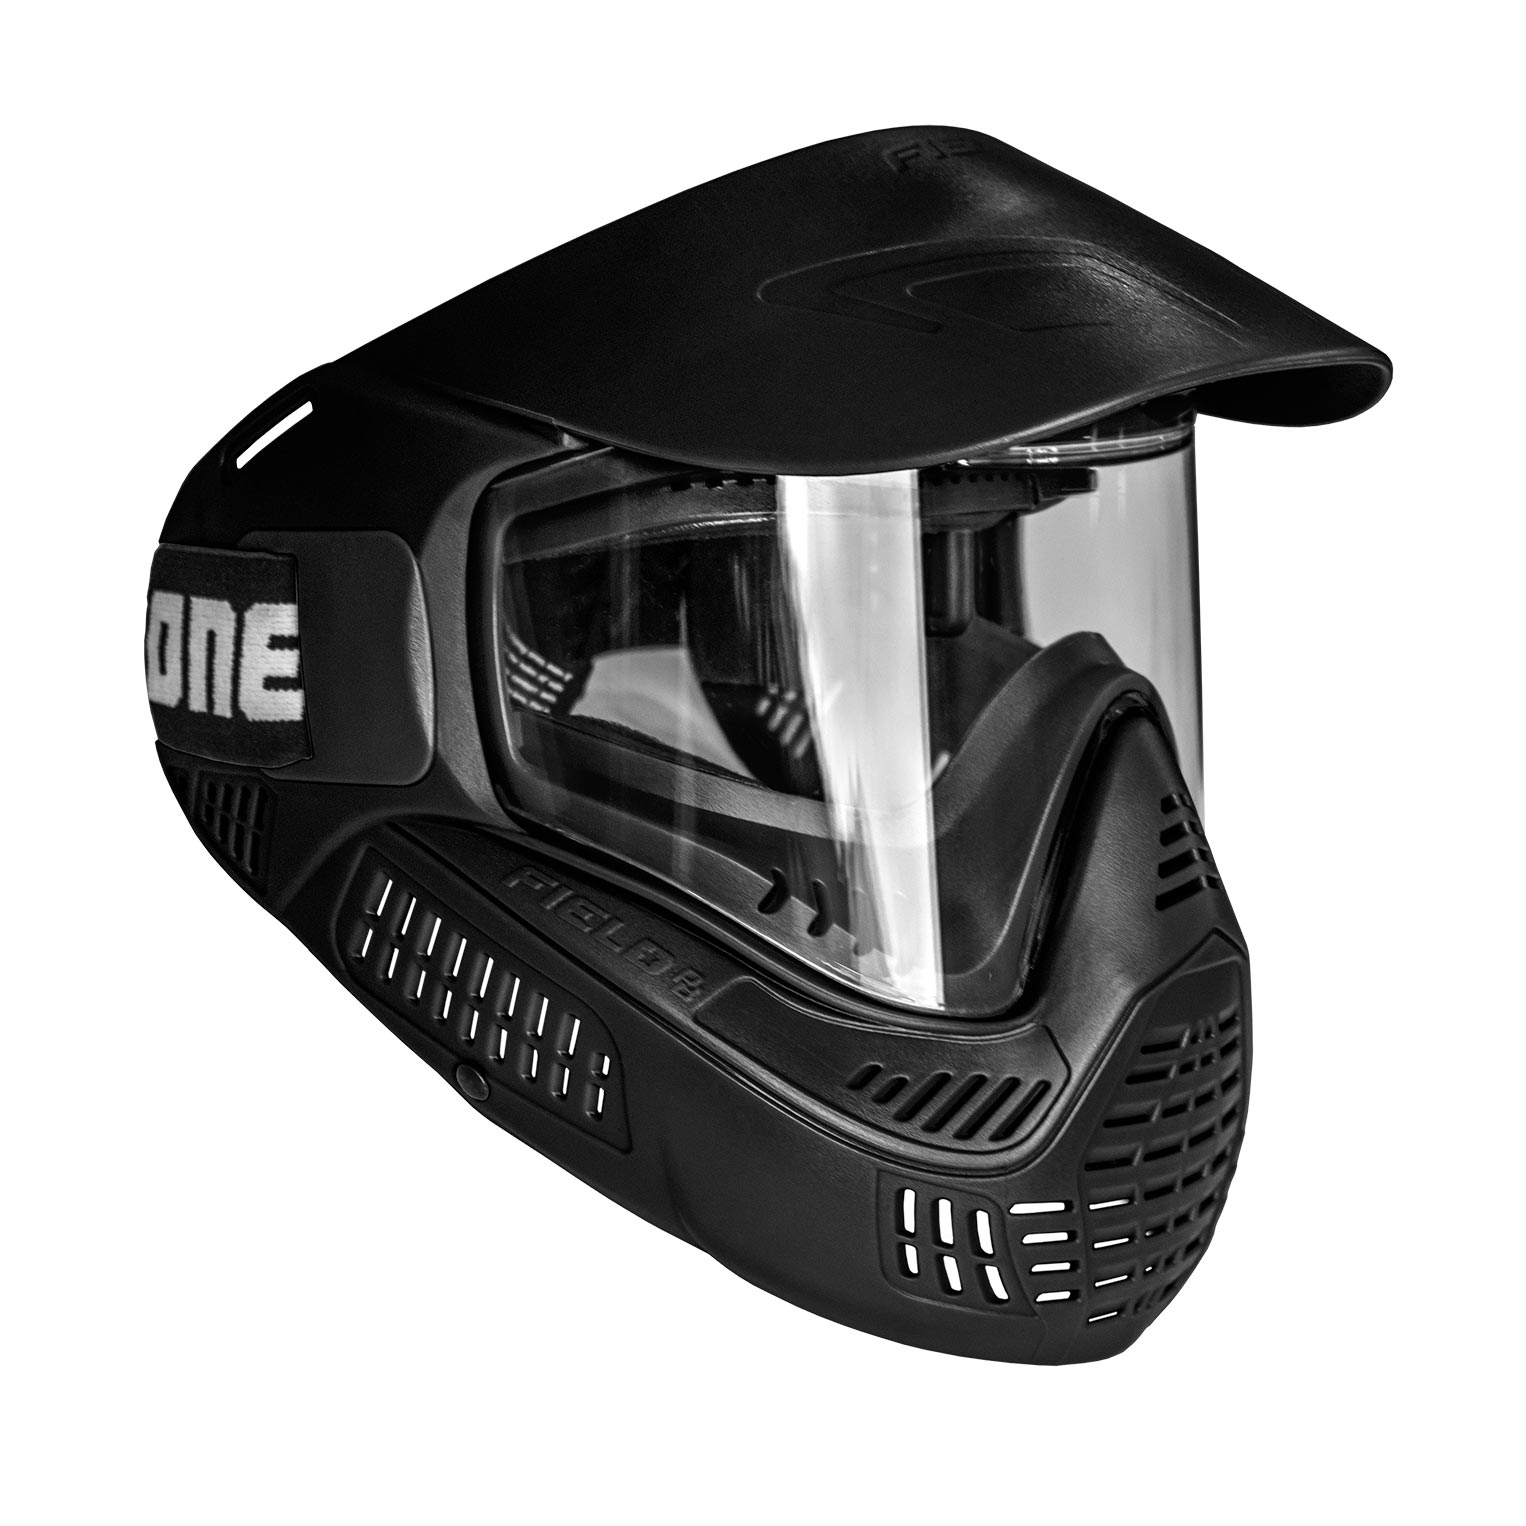 Goggle #ONE Thermal Black V2 - Rubber Foam